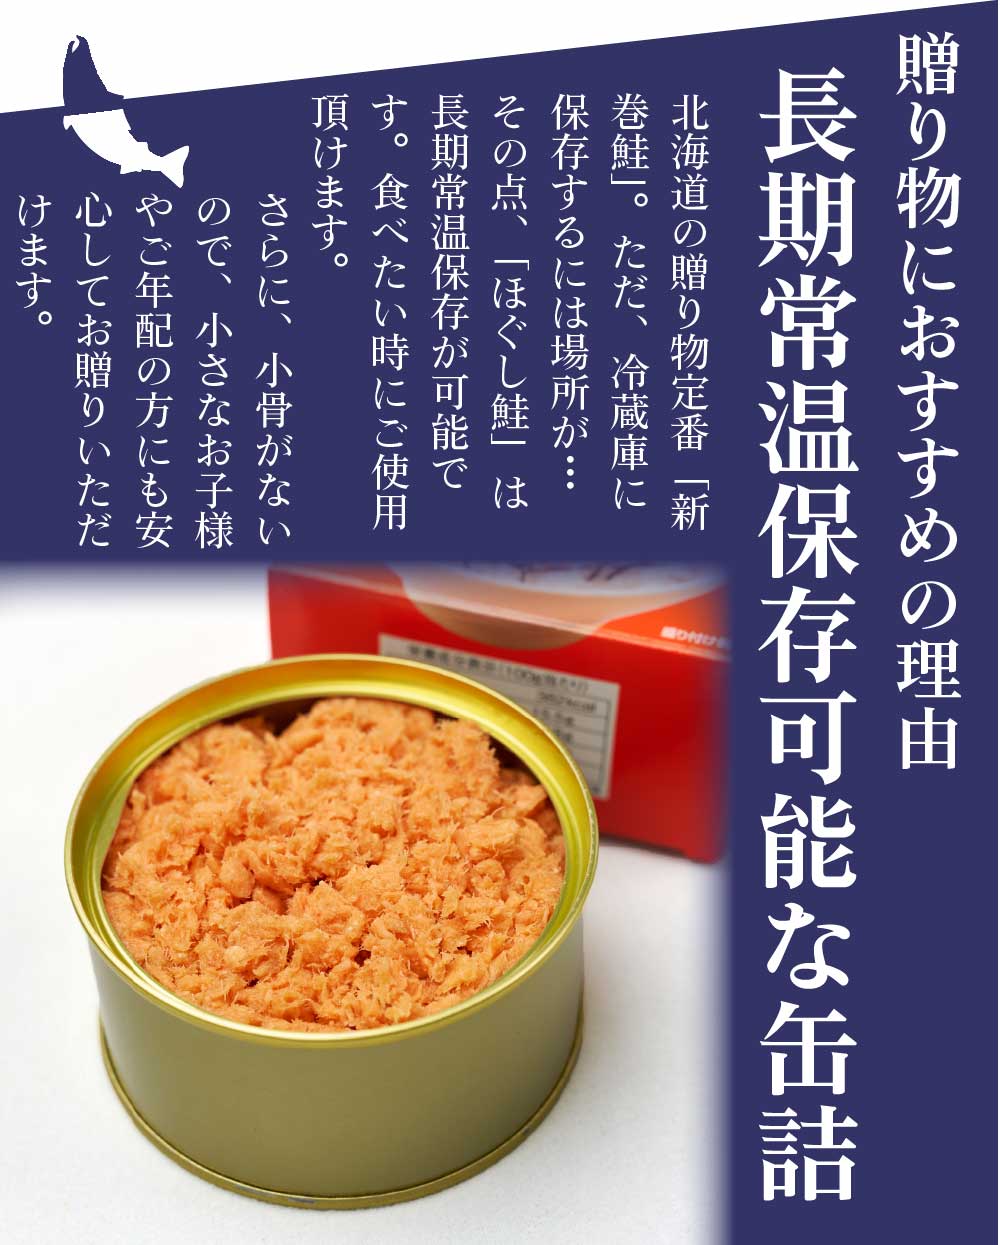  free shipping Japanese cedar .f-z... salmon 180g × 10 can set your order . earth production earth production confection salmon ... salmon flakes present Father's day present 